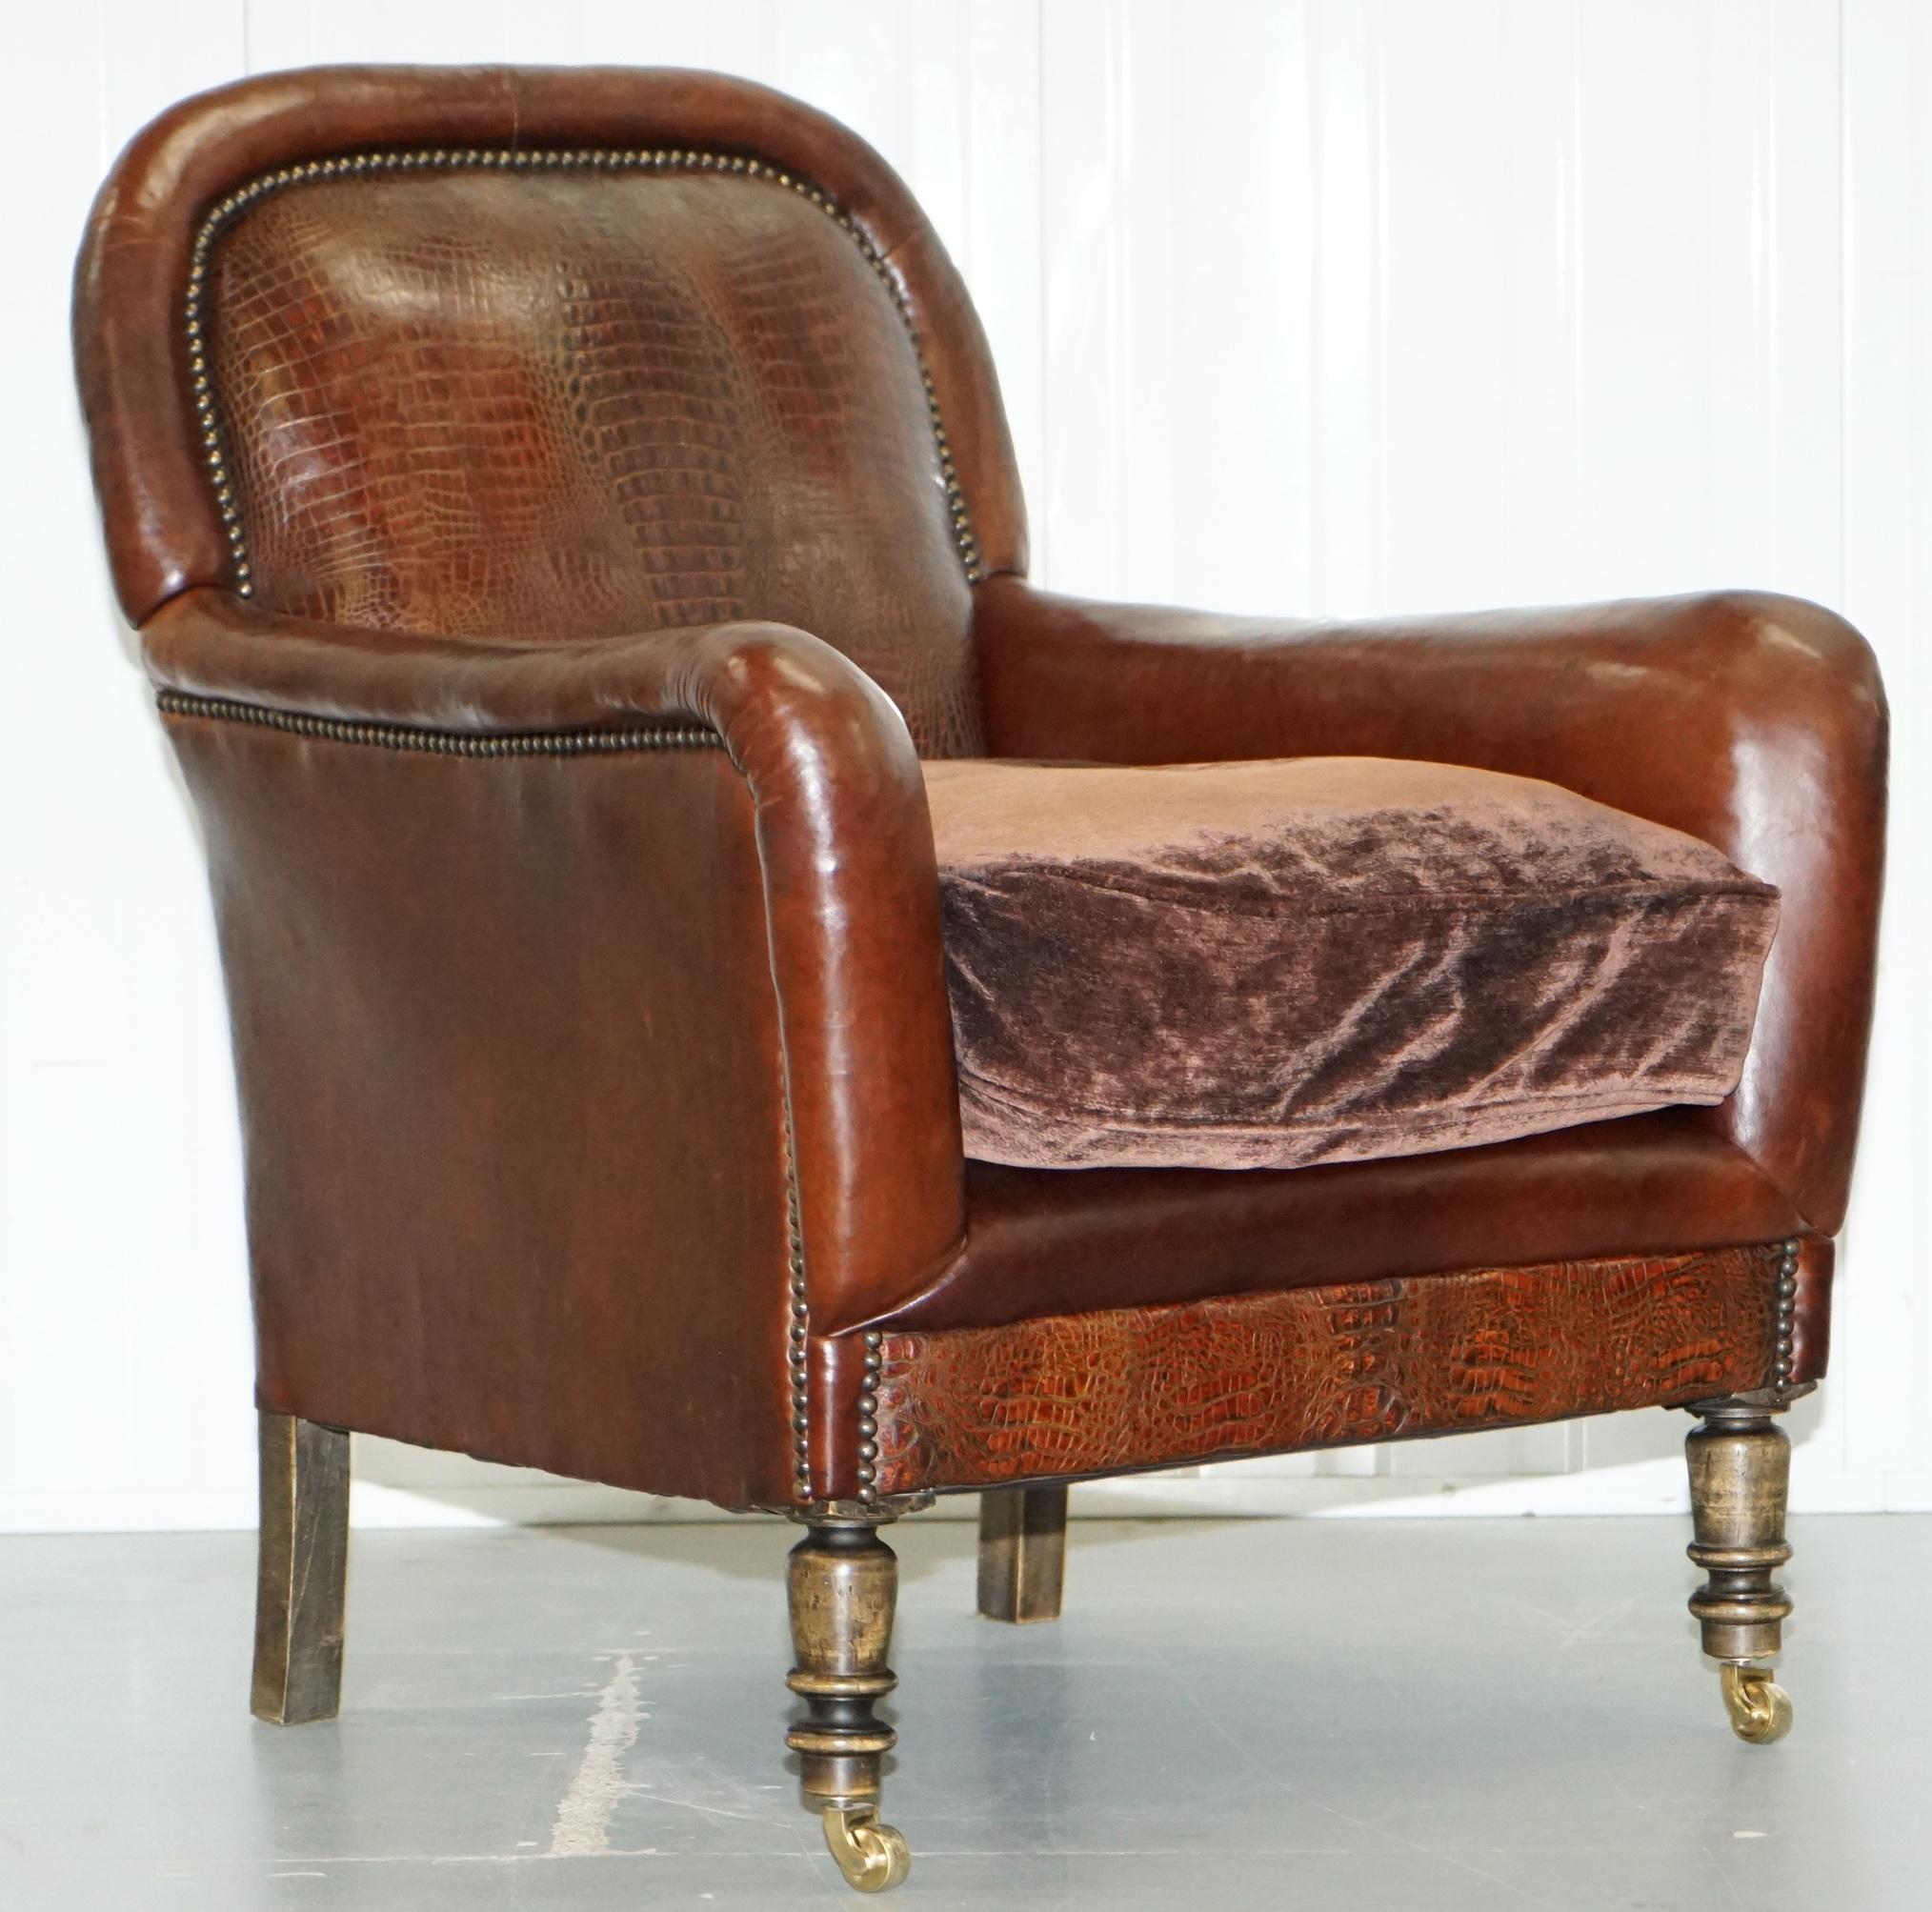 We are delighted to offer for sale this exceptionally rare pair of aged brown leather club armchairs with Alligator or Crocodile patina leather panels

I have never seen another pair like this, the back panels are exquisite, the timber frames are